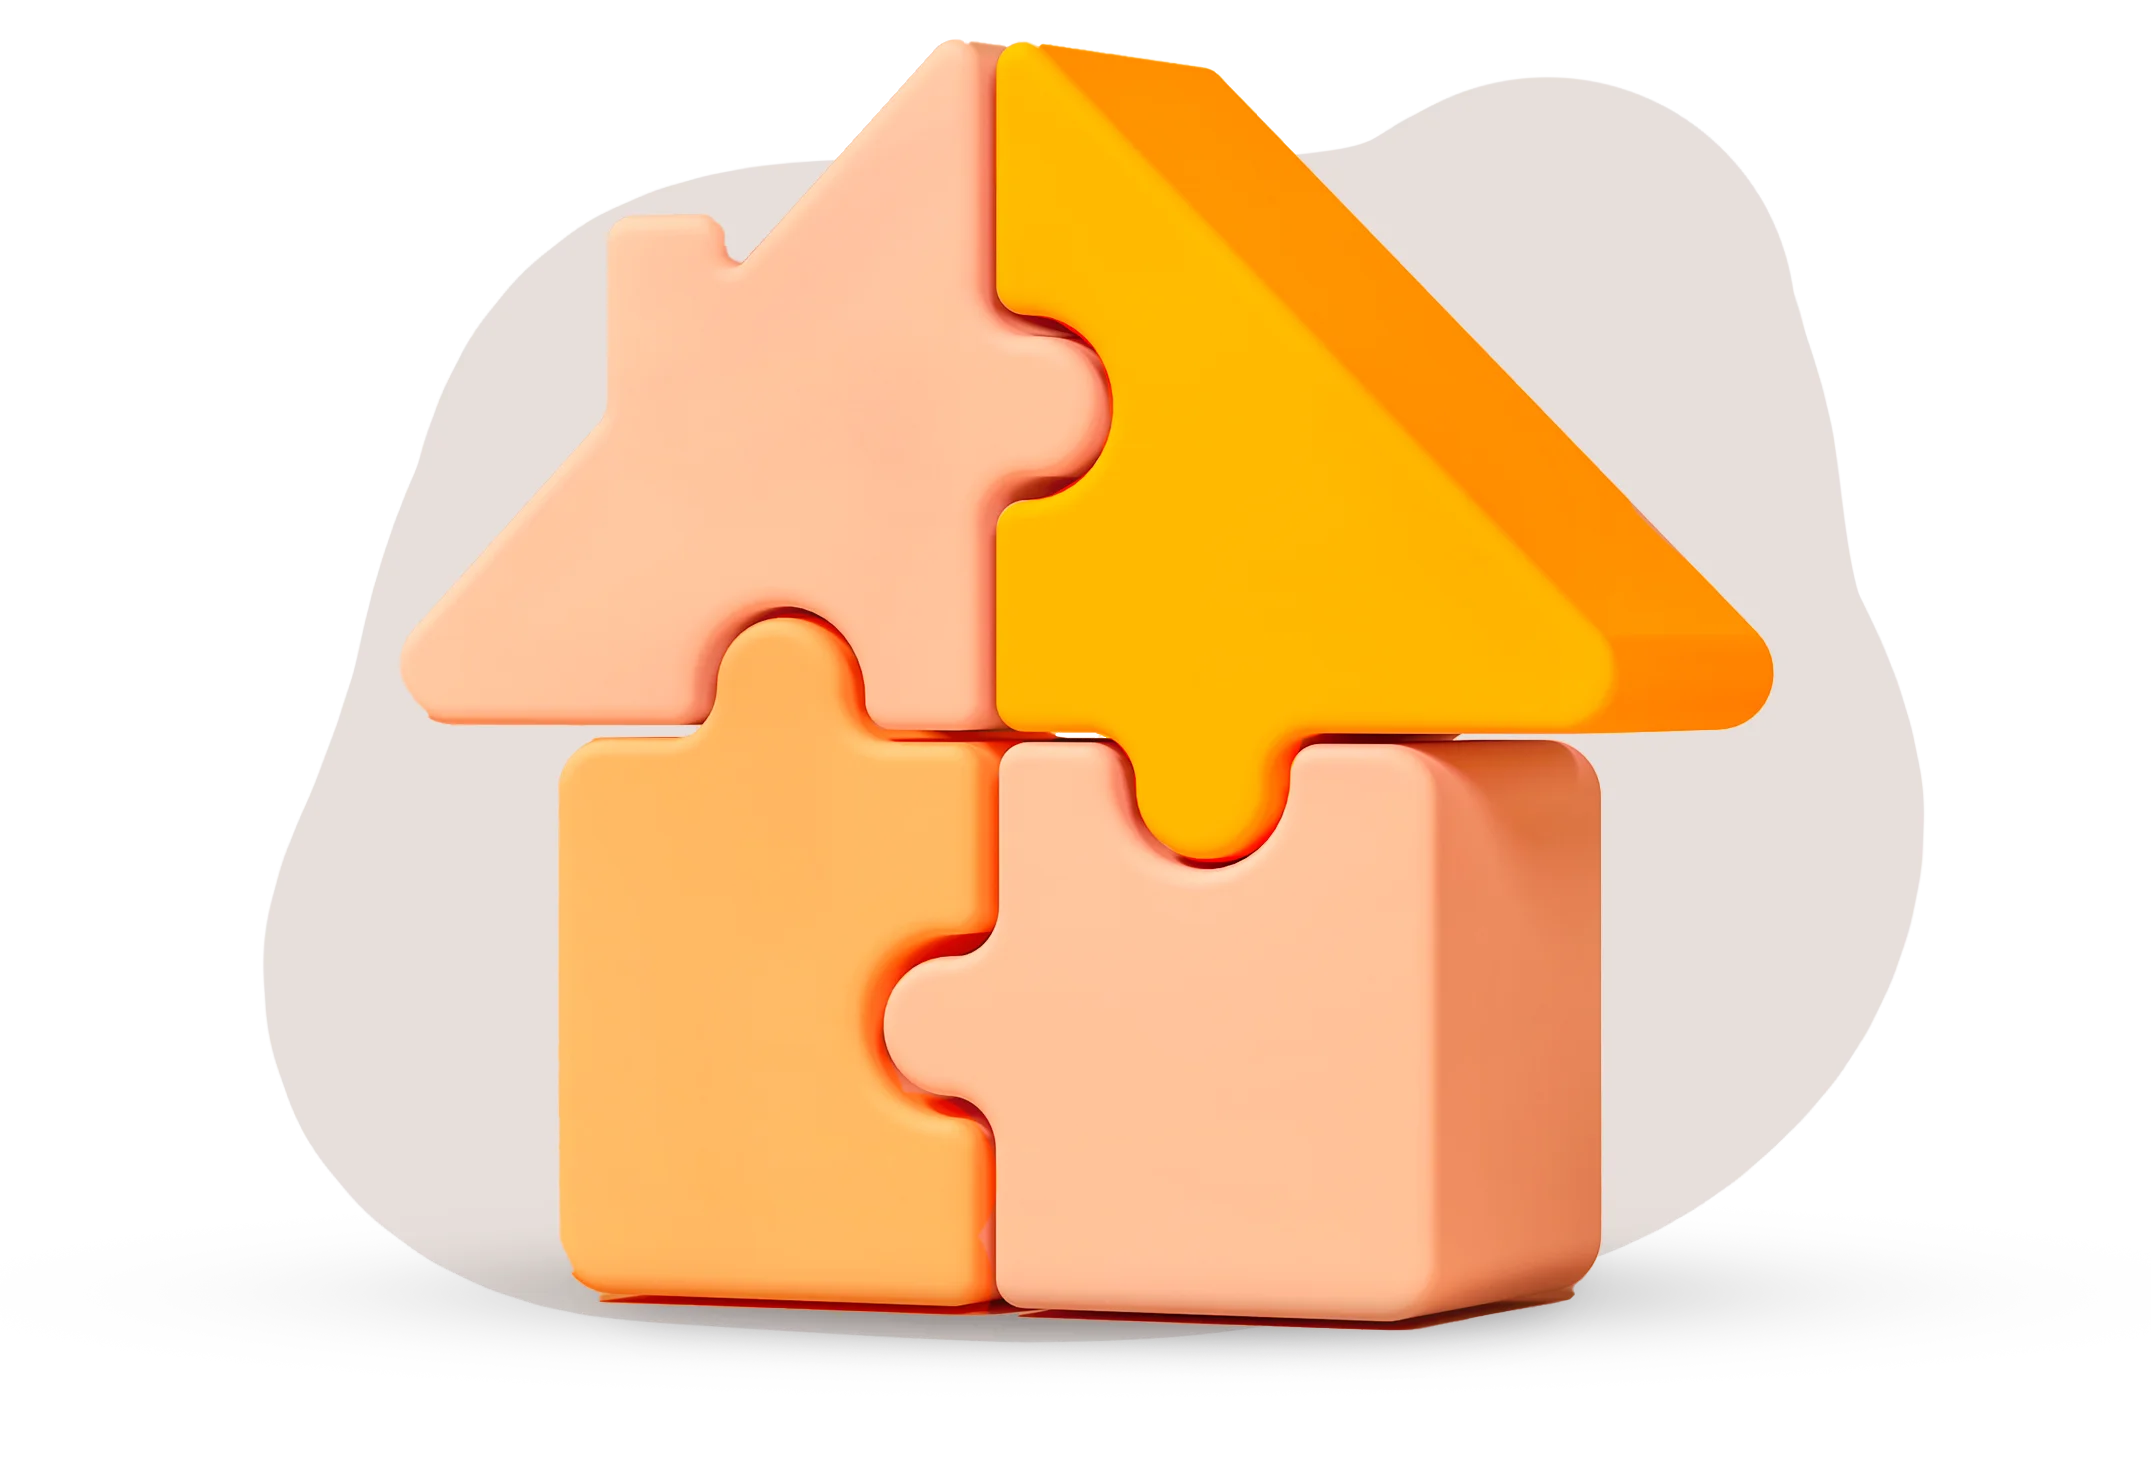 Four puzzle pieces, joining together to make a house